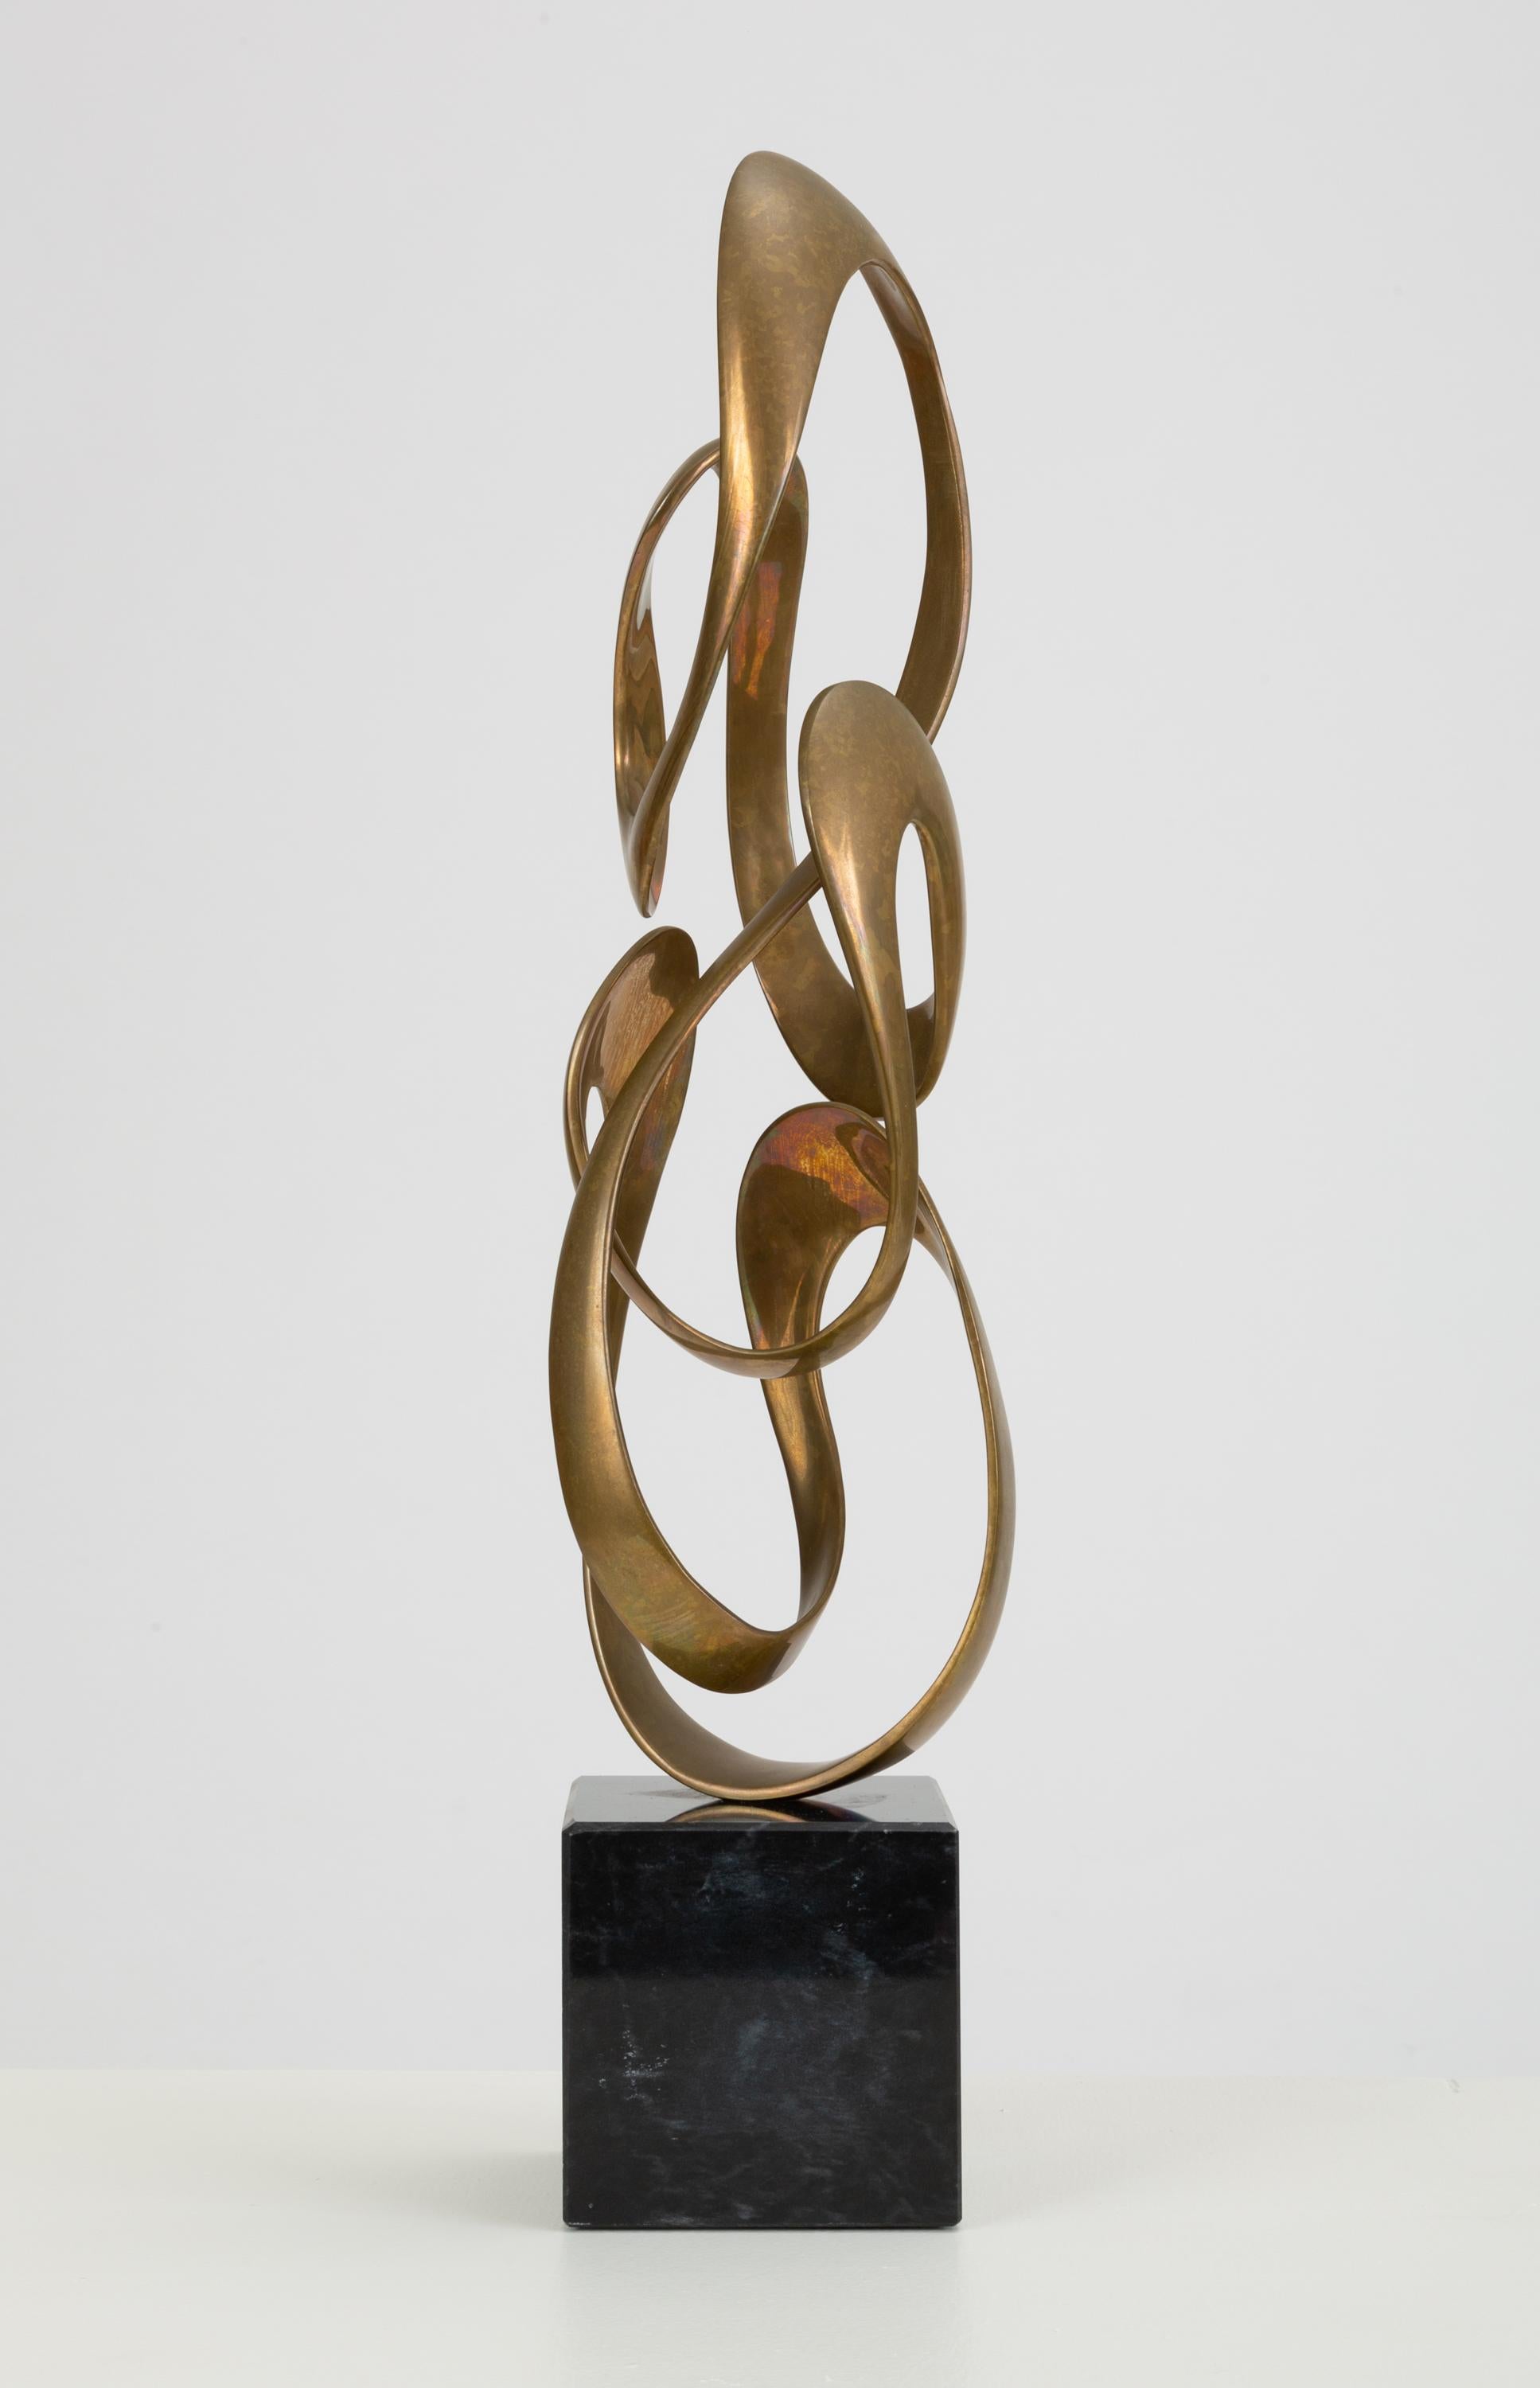 Carmel, CA-based identical twins Tom and Bob Bennett created mounted bronze sculptures, both abstract and figurative, at their studio through the 1970s, 80s and 90s. This abstract piece with a ribbon-like, Moebius strip construction is typical of